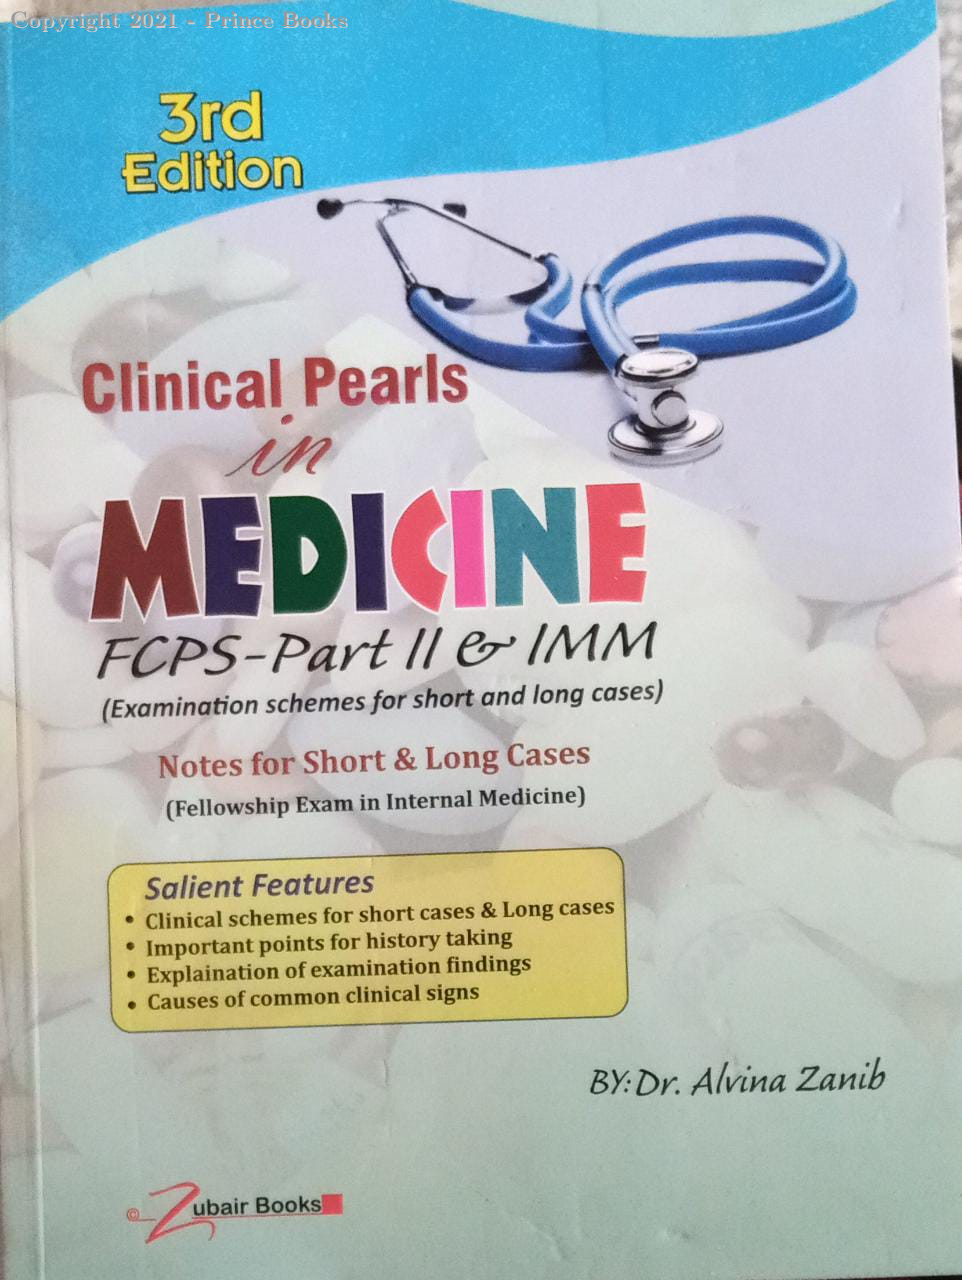 clinical pearls in medicine fcps part ii & imm, 3e